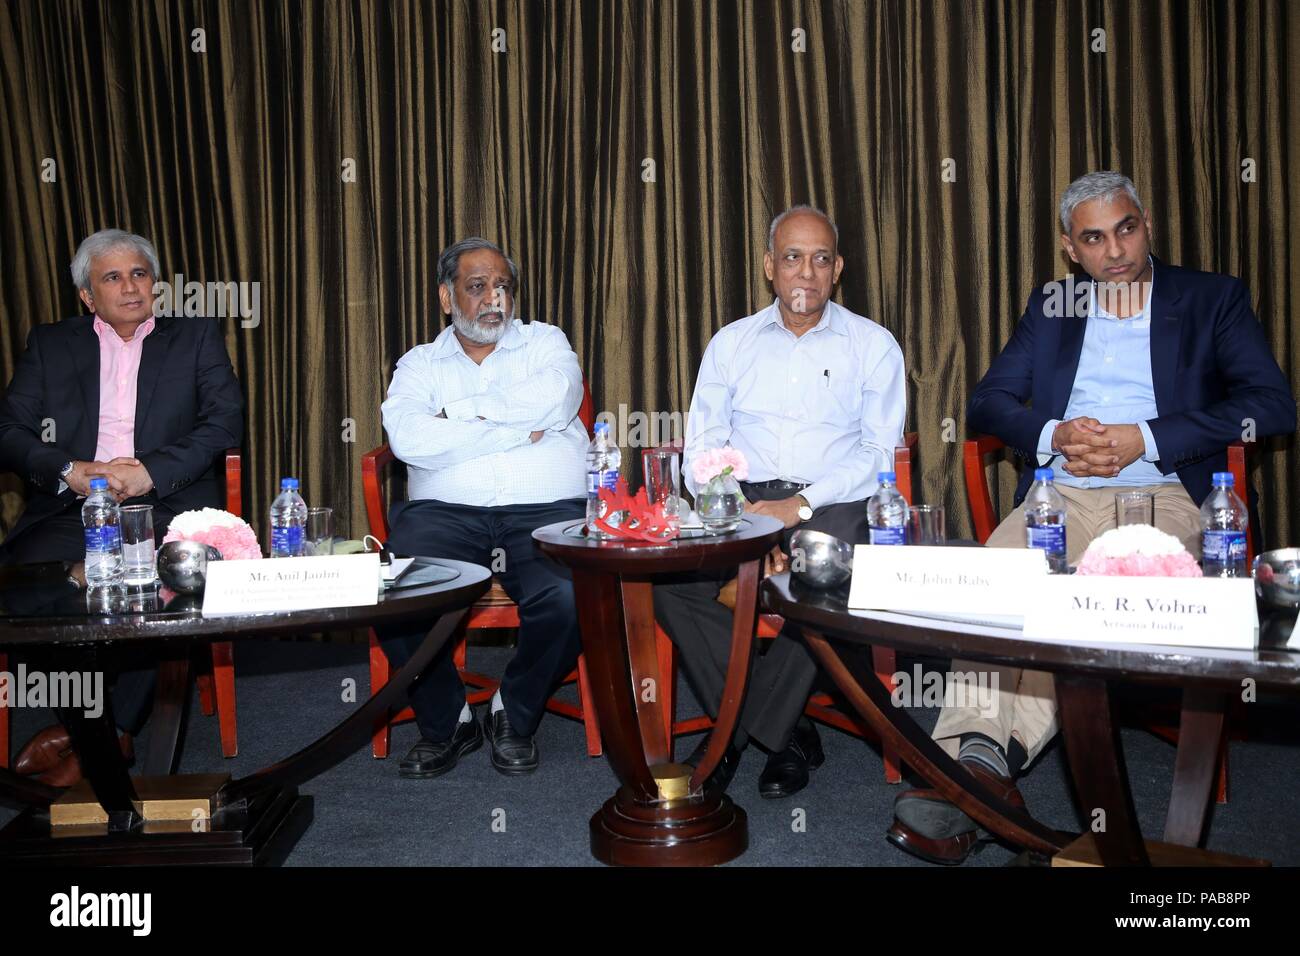 New Delhi, India. 20th July, 2018. (L-R) Dr S.S. Gupta, Senior Development Officer, Department of Industrial Policy and Promotion, Ministry of Commerce and Industry, Anil Jauhri, CEO, National Accreditation Board for Certification Bodies (NABCB) Vivek Jhangiani, The All India Toy Manufacturers Association (TAITMA) during the Panel discussion on Indian Toy Industry Credit: Jyoti Kapoor/Pacific Press/Alamy Live News Stock Photo